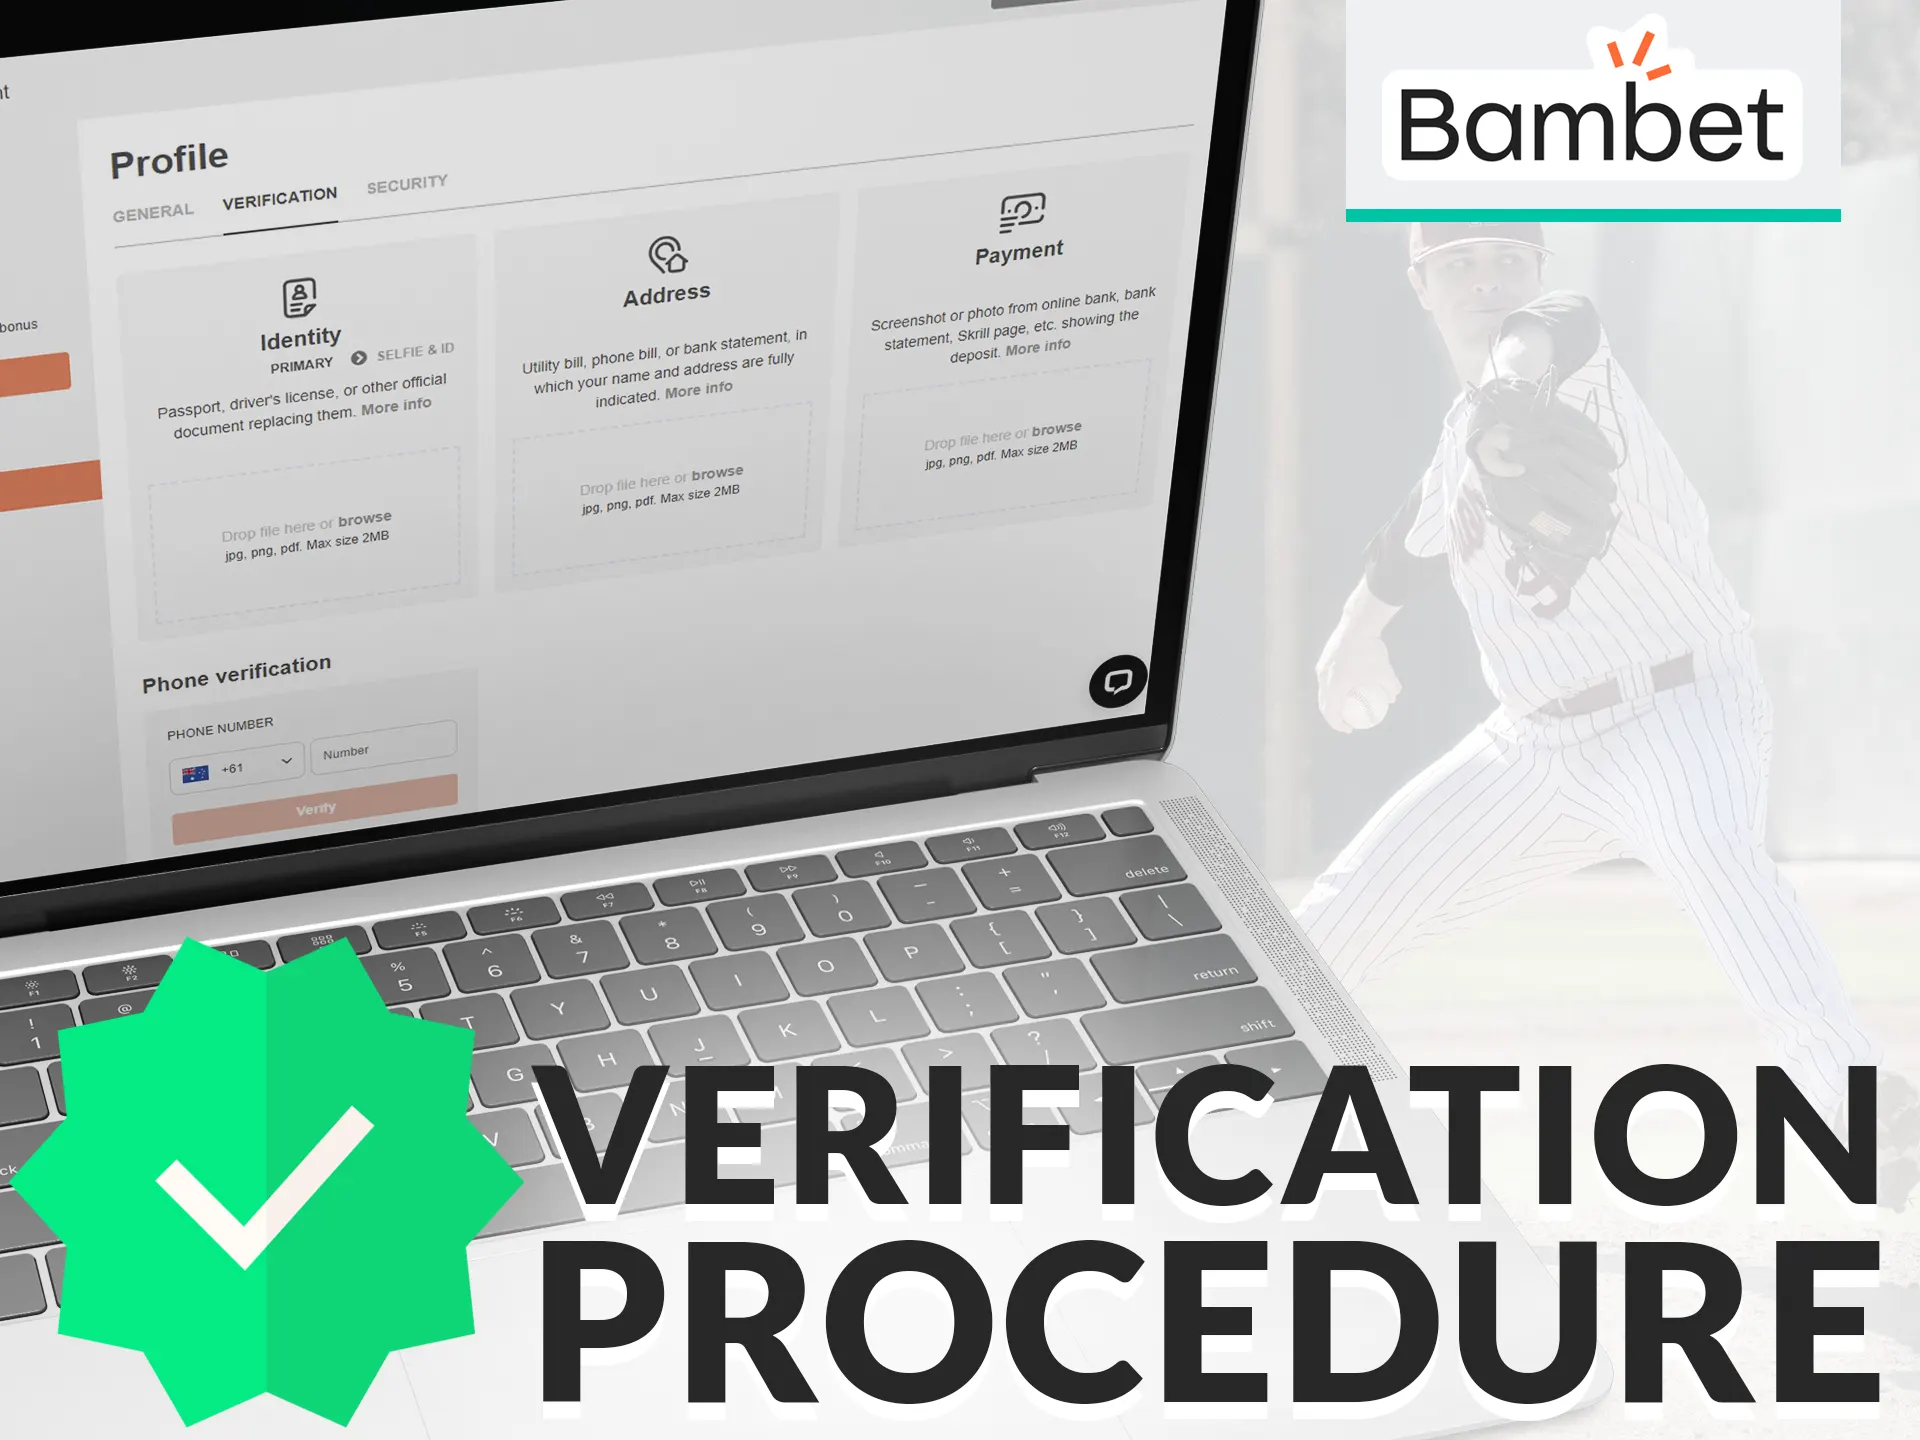 In order to secure their data players should go through the verification procedure on the Bambet website.